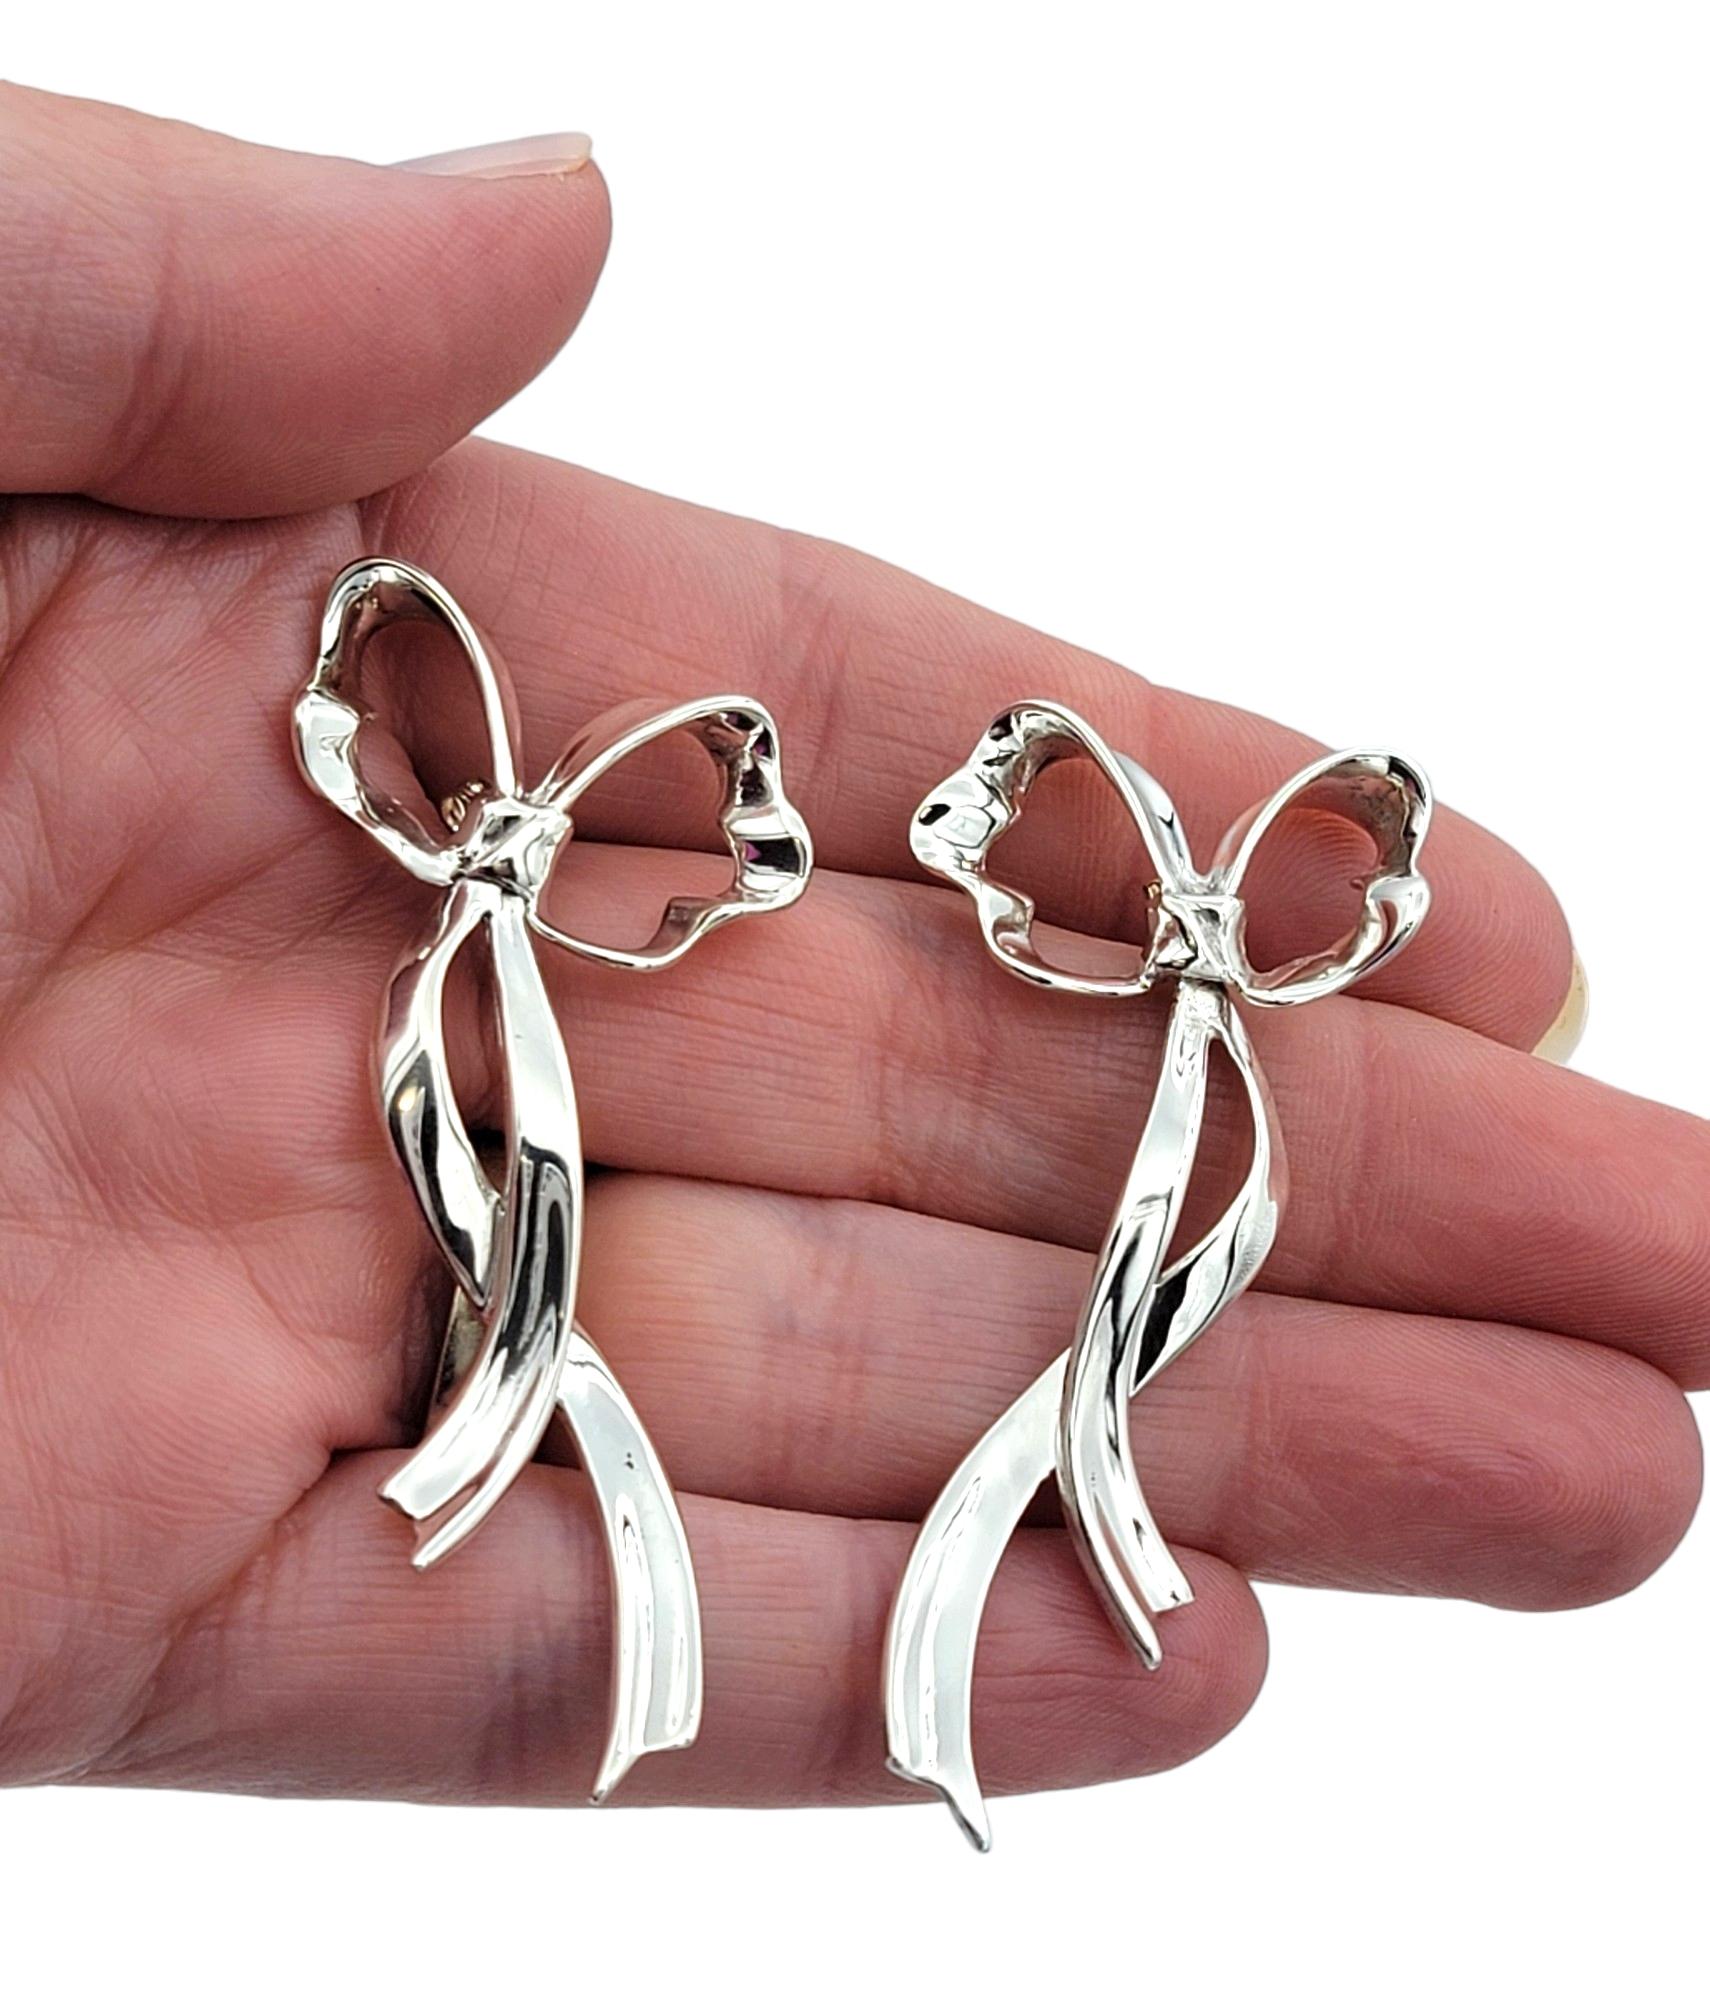 Vintage Tiffany & Co. Large Ribbon Bow Earrings Set in Polished Sterling Silver For Sale 2